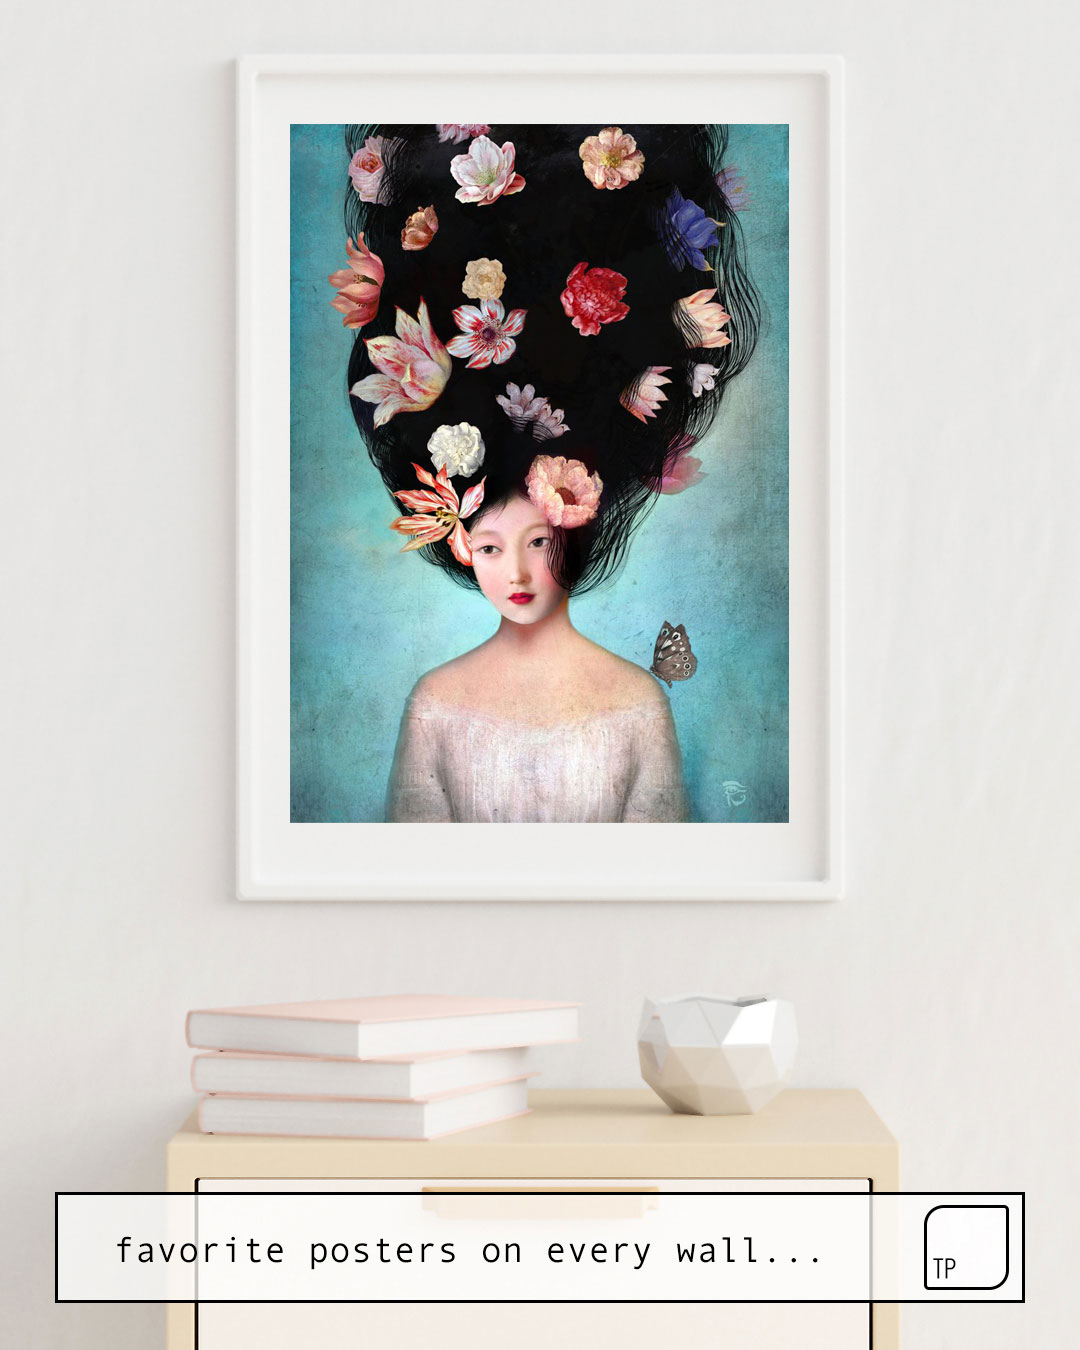 The photo shows an example of furnishing with the motif THE BOTANISTS DAUGHTER by Christian Schloe as mural